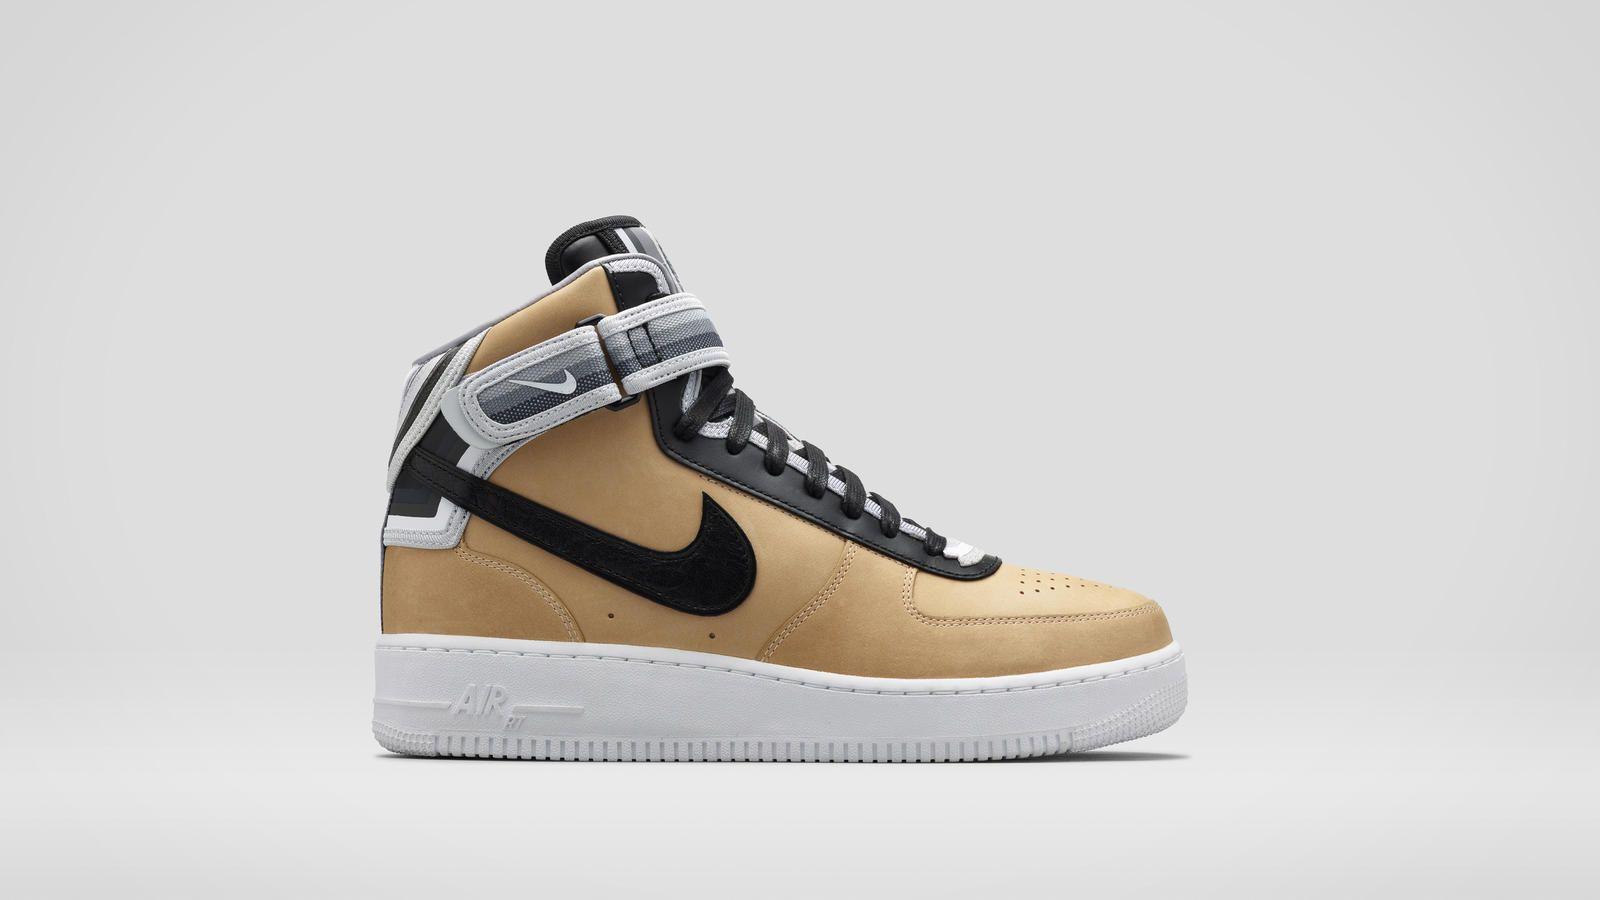 Triangle Offense: The Third And Final Nike + R.T. Air Force 1